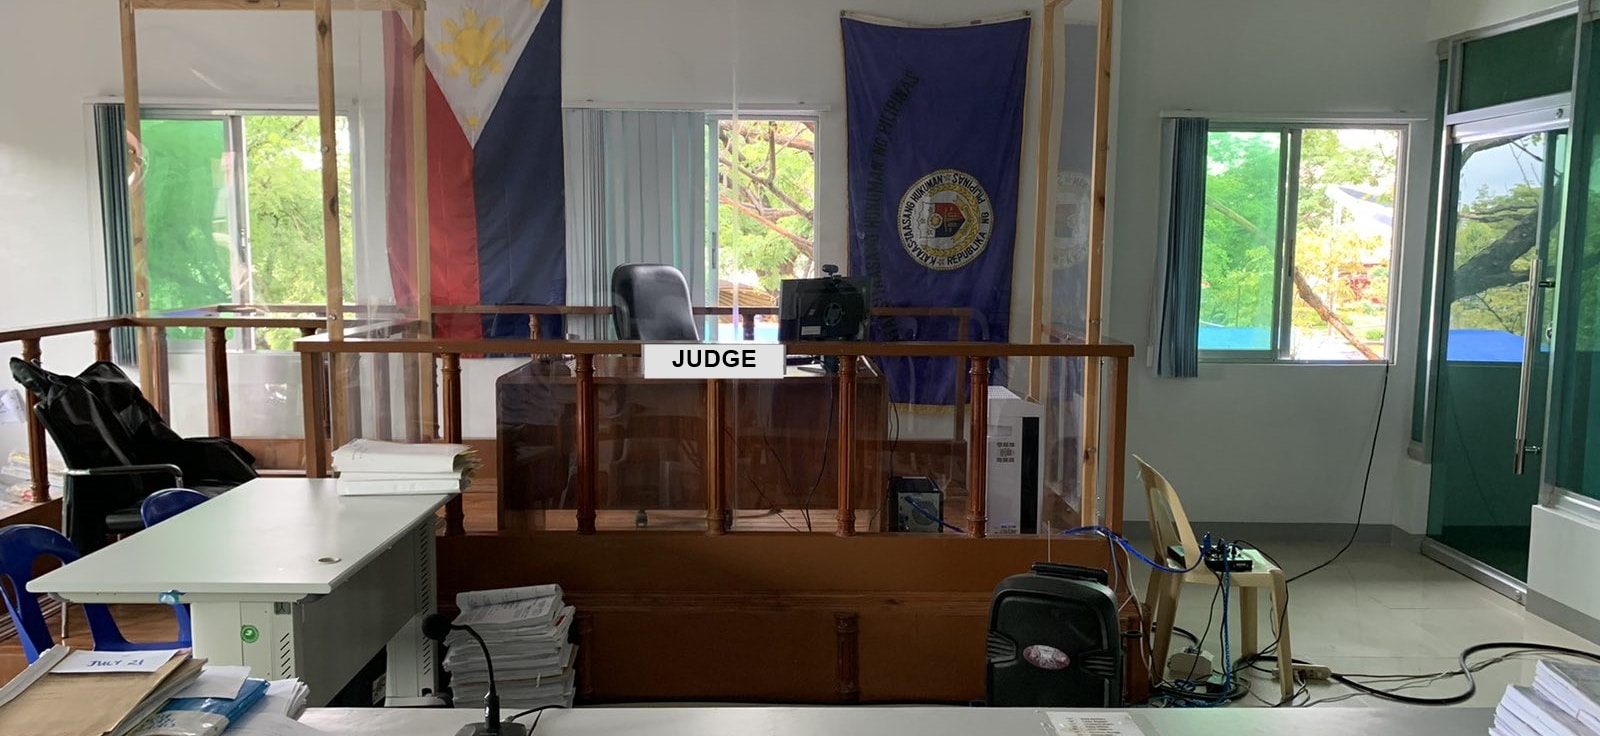 A regional trial court chamber in the Philippines